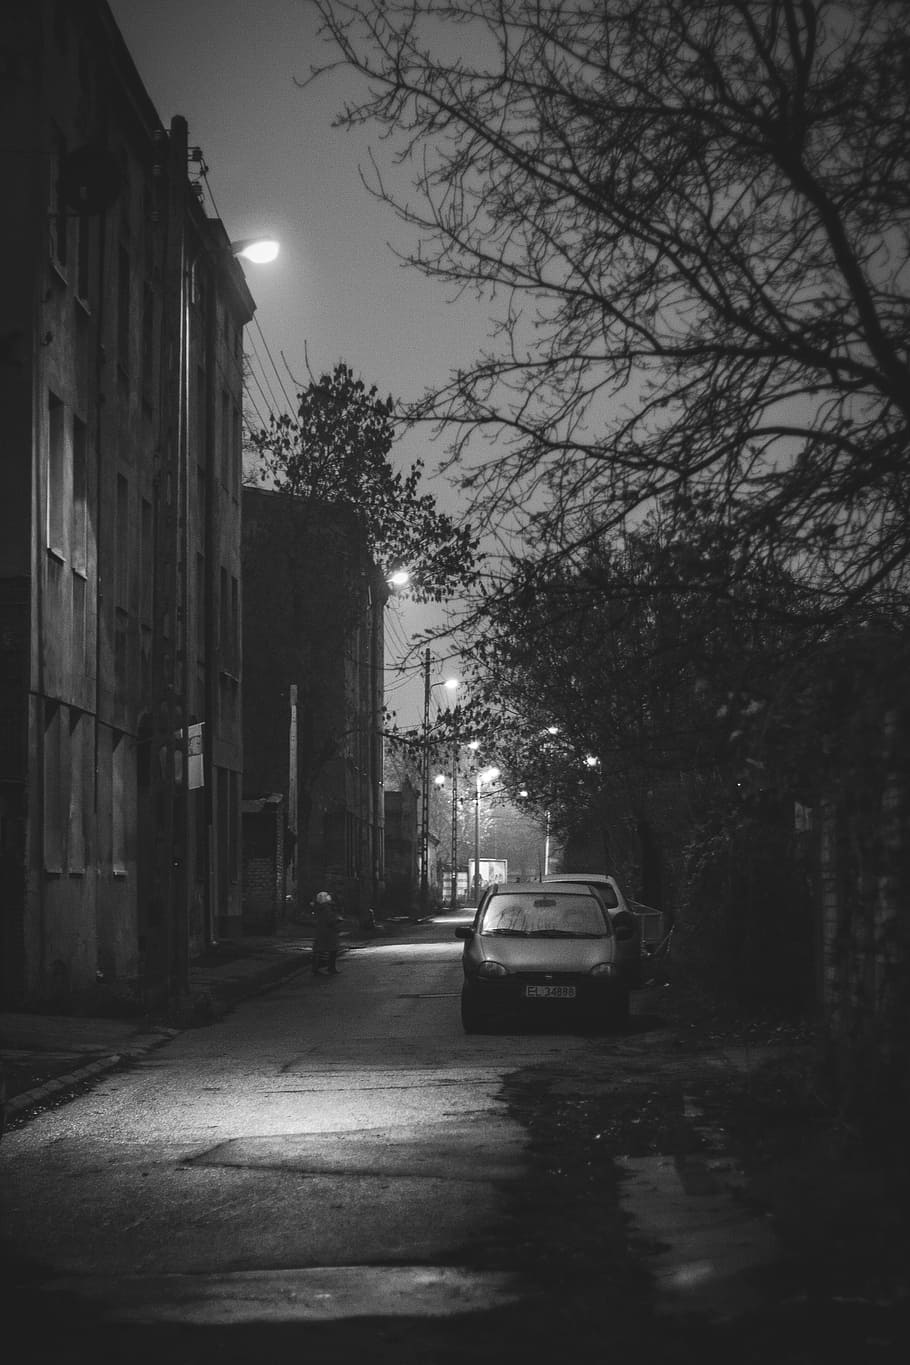 grayscale photography, car, parked, street, bw, bandw, city, vintage, night, lodz